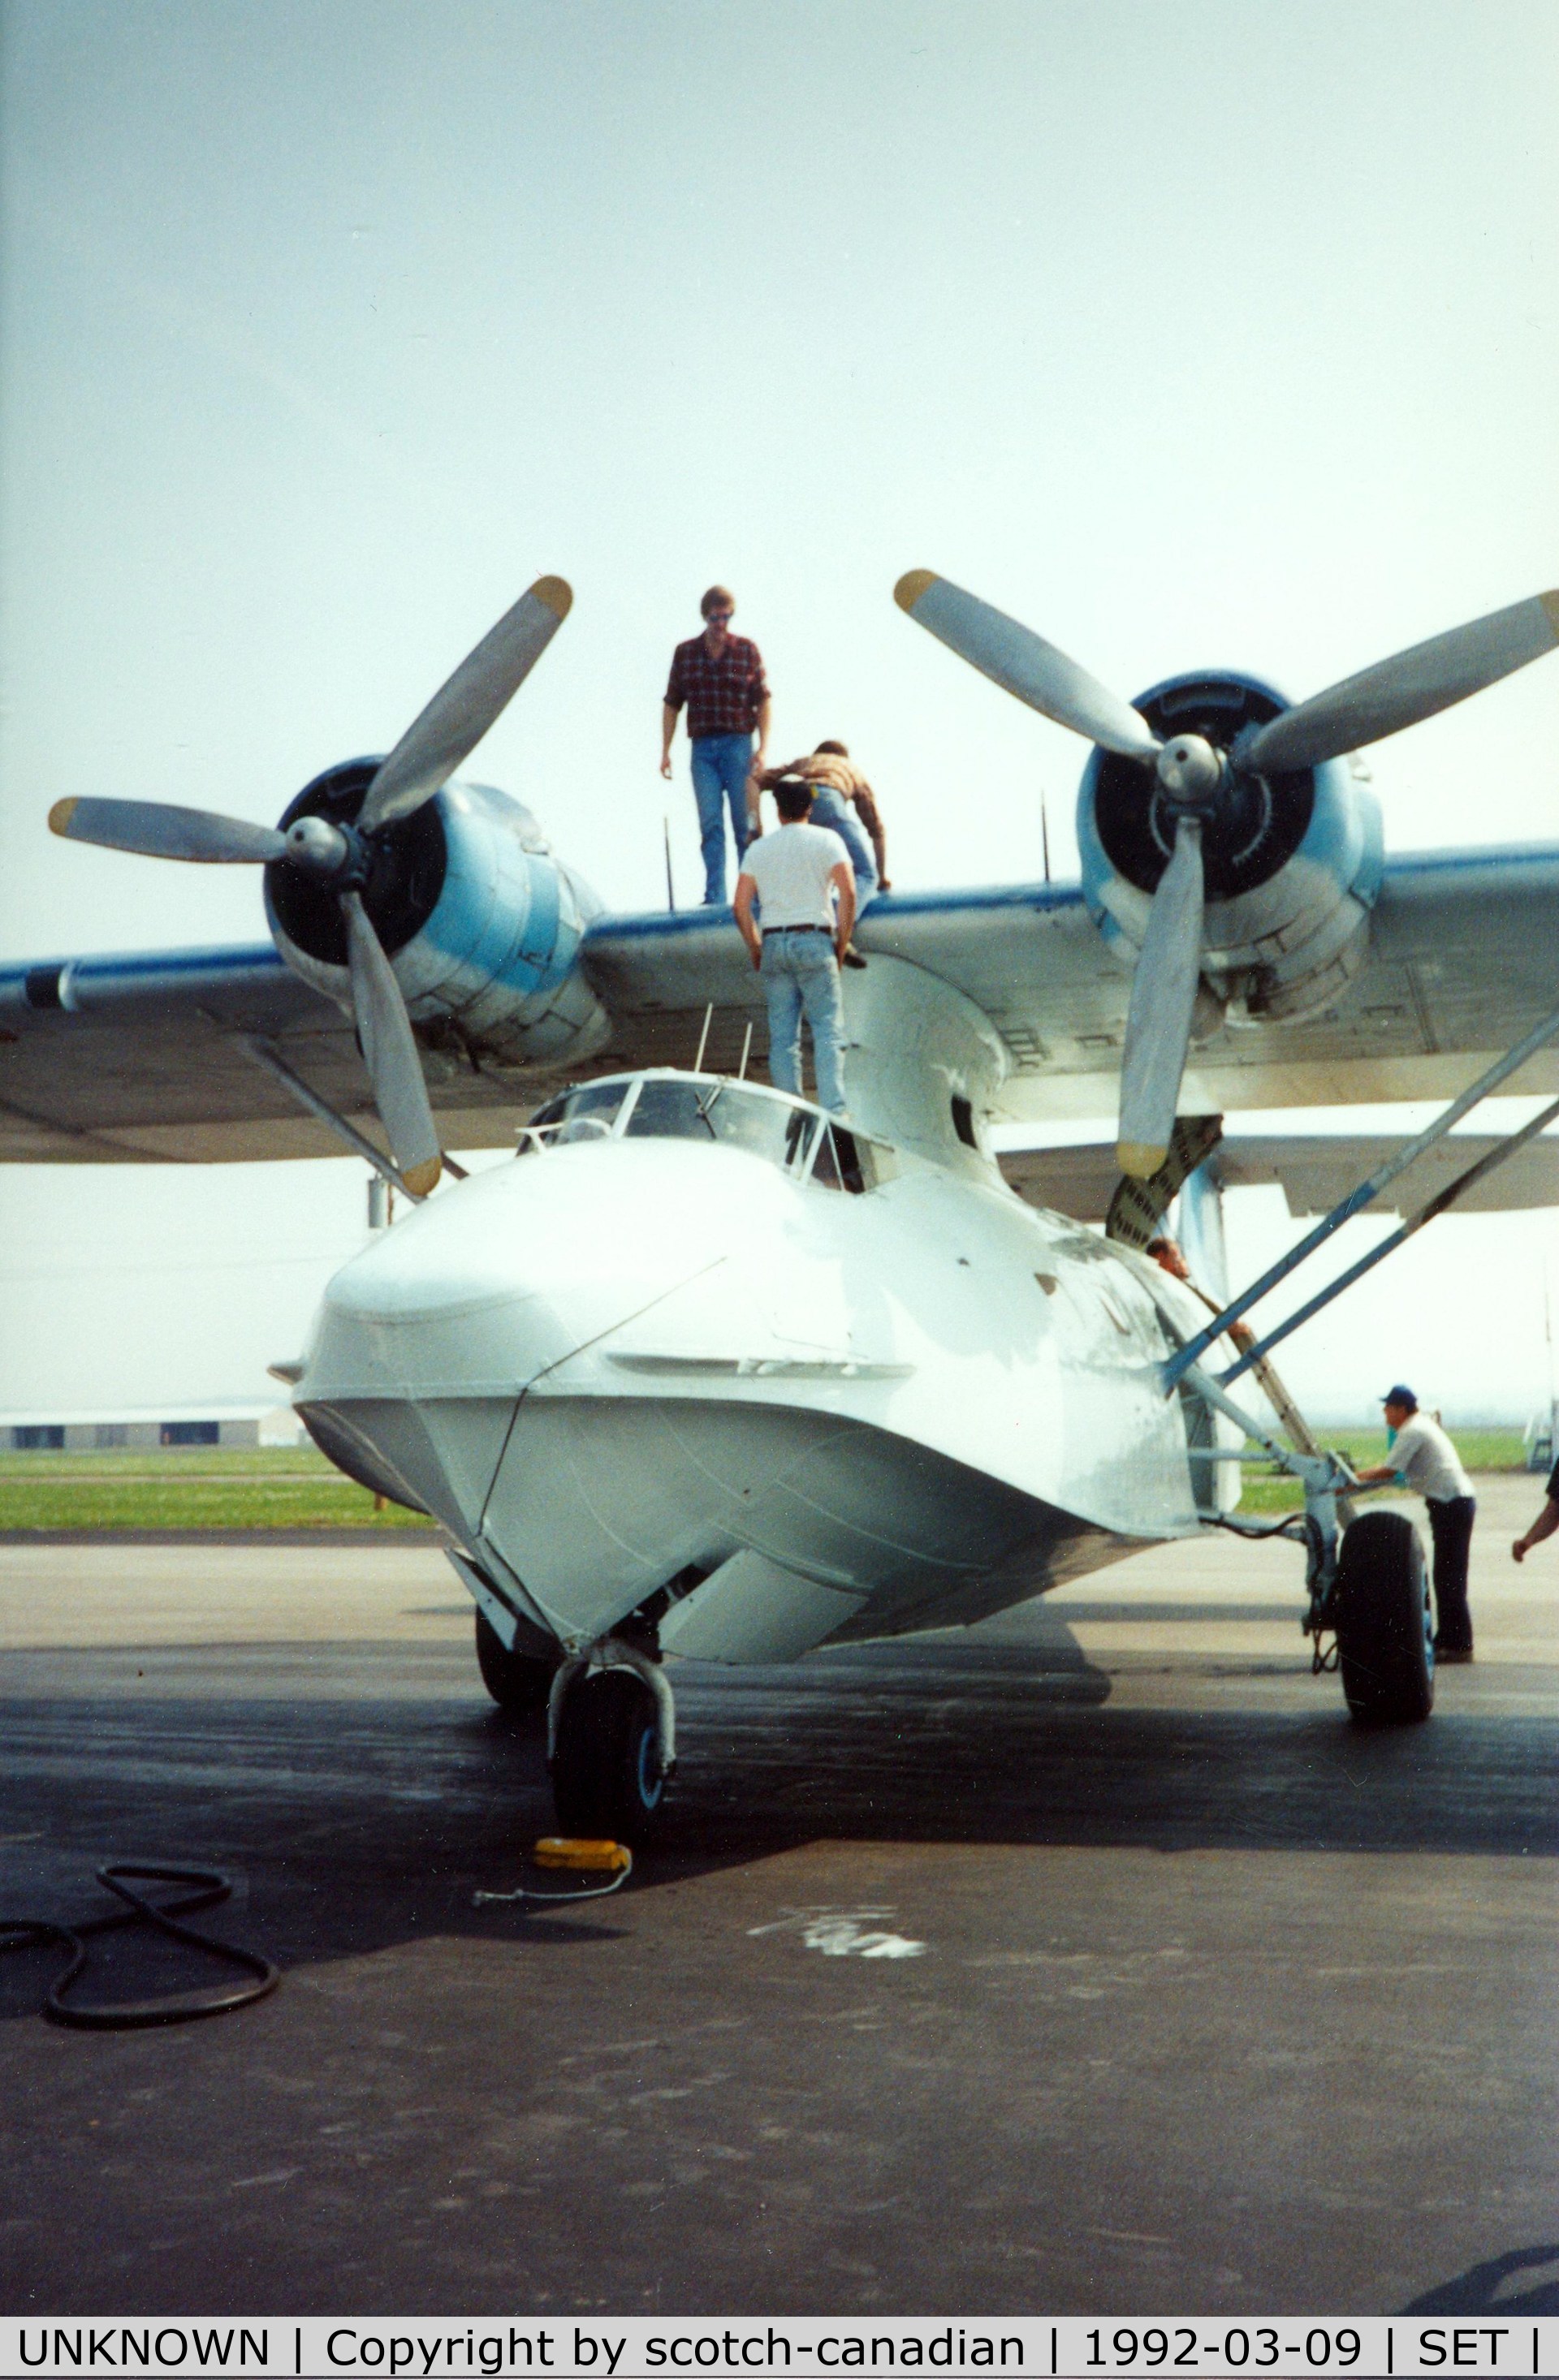 UNKNOWN, Miscellaneous Various C/N unknown, PBY Catalina at St. Charles County Smartt Airport, St. Charles, MO. In 1992 the FAA identifier was 3SZ.